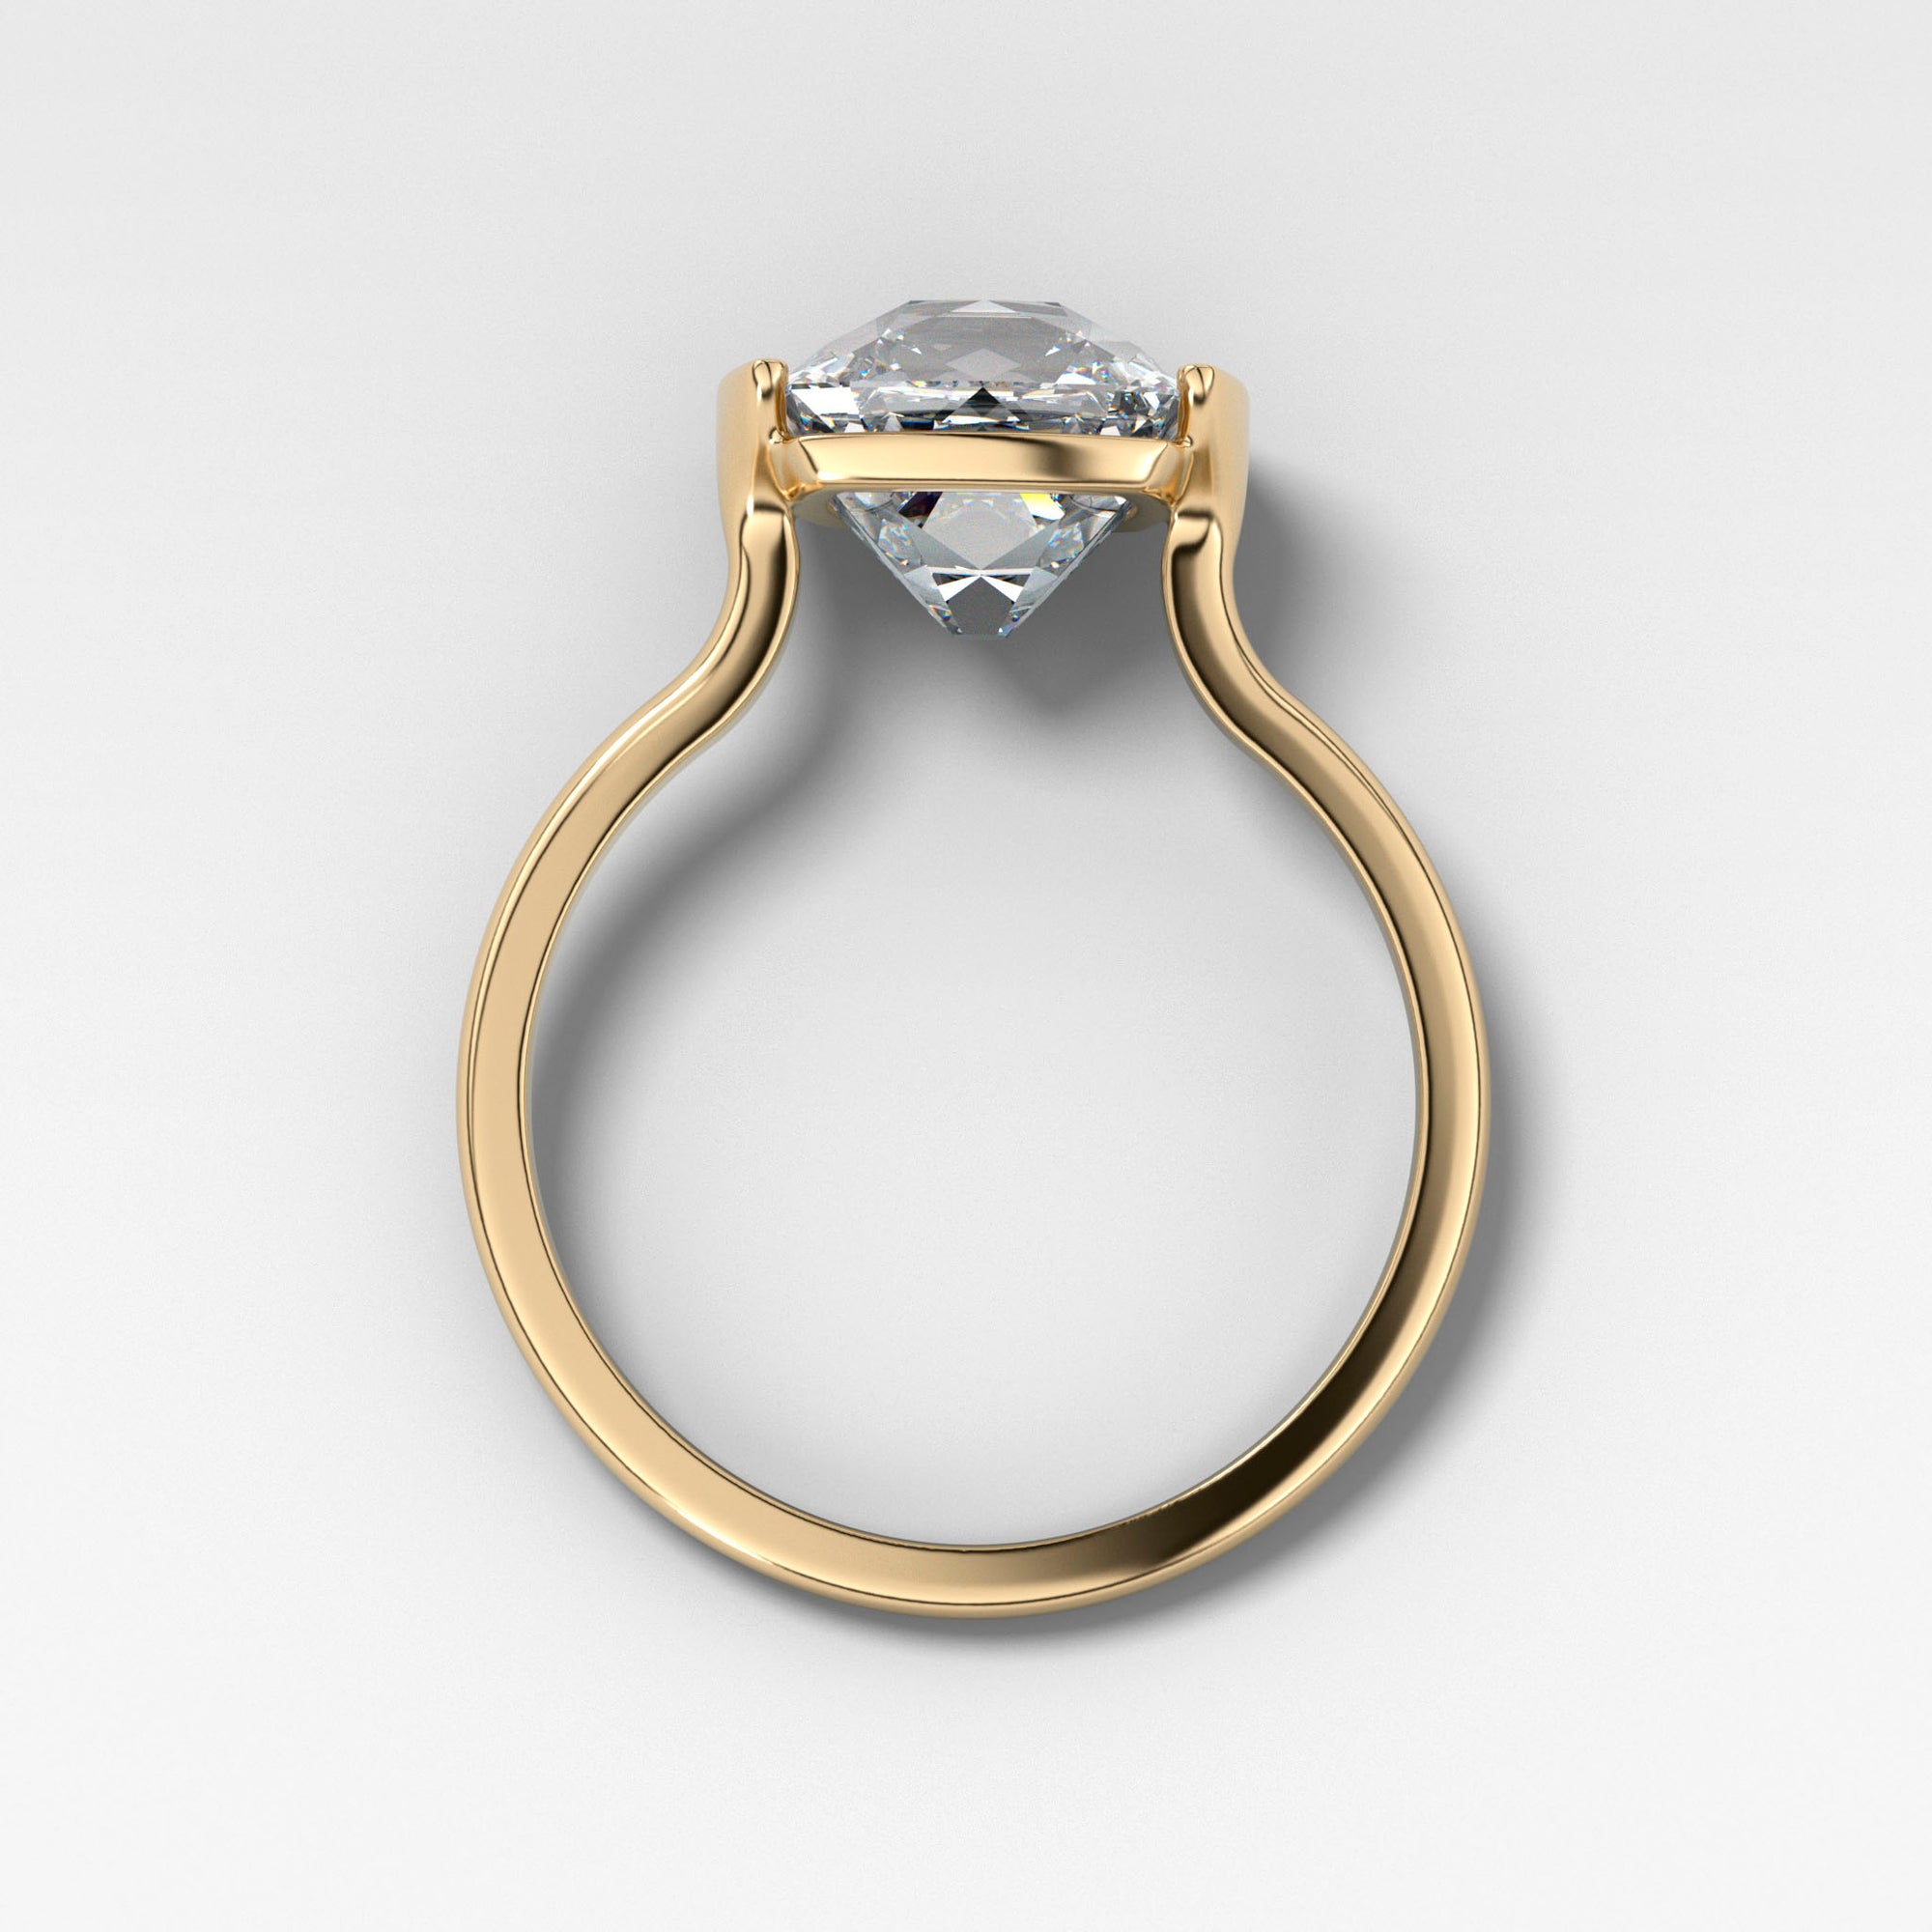 Half Bezel Solitaire Engagement Ring With Old Mine Cut in Yellow Gold by Good Stone